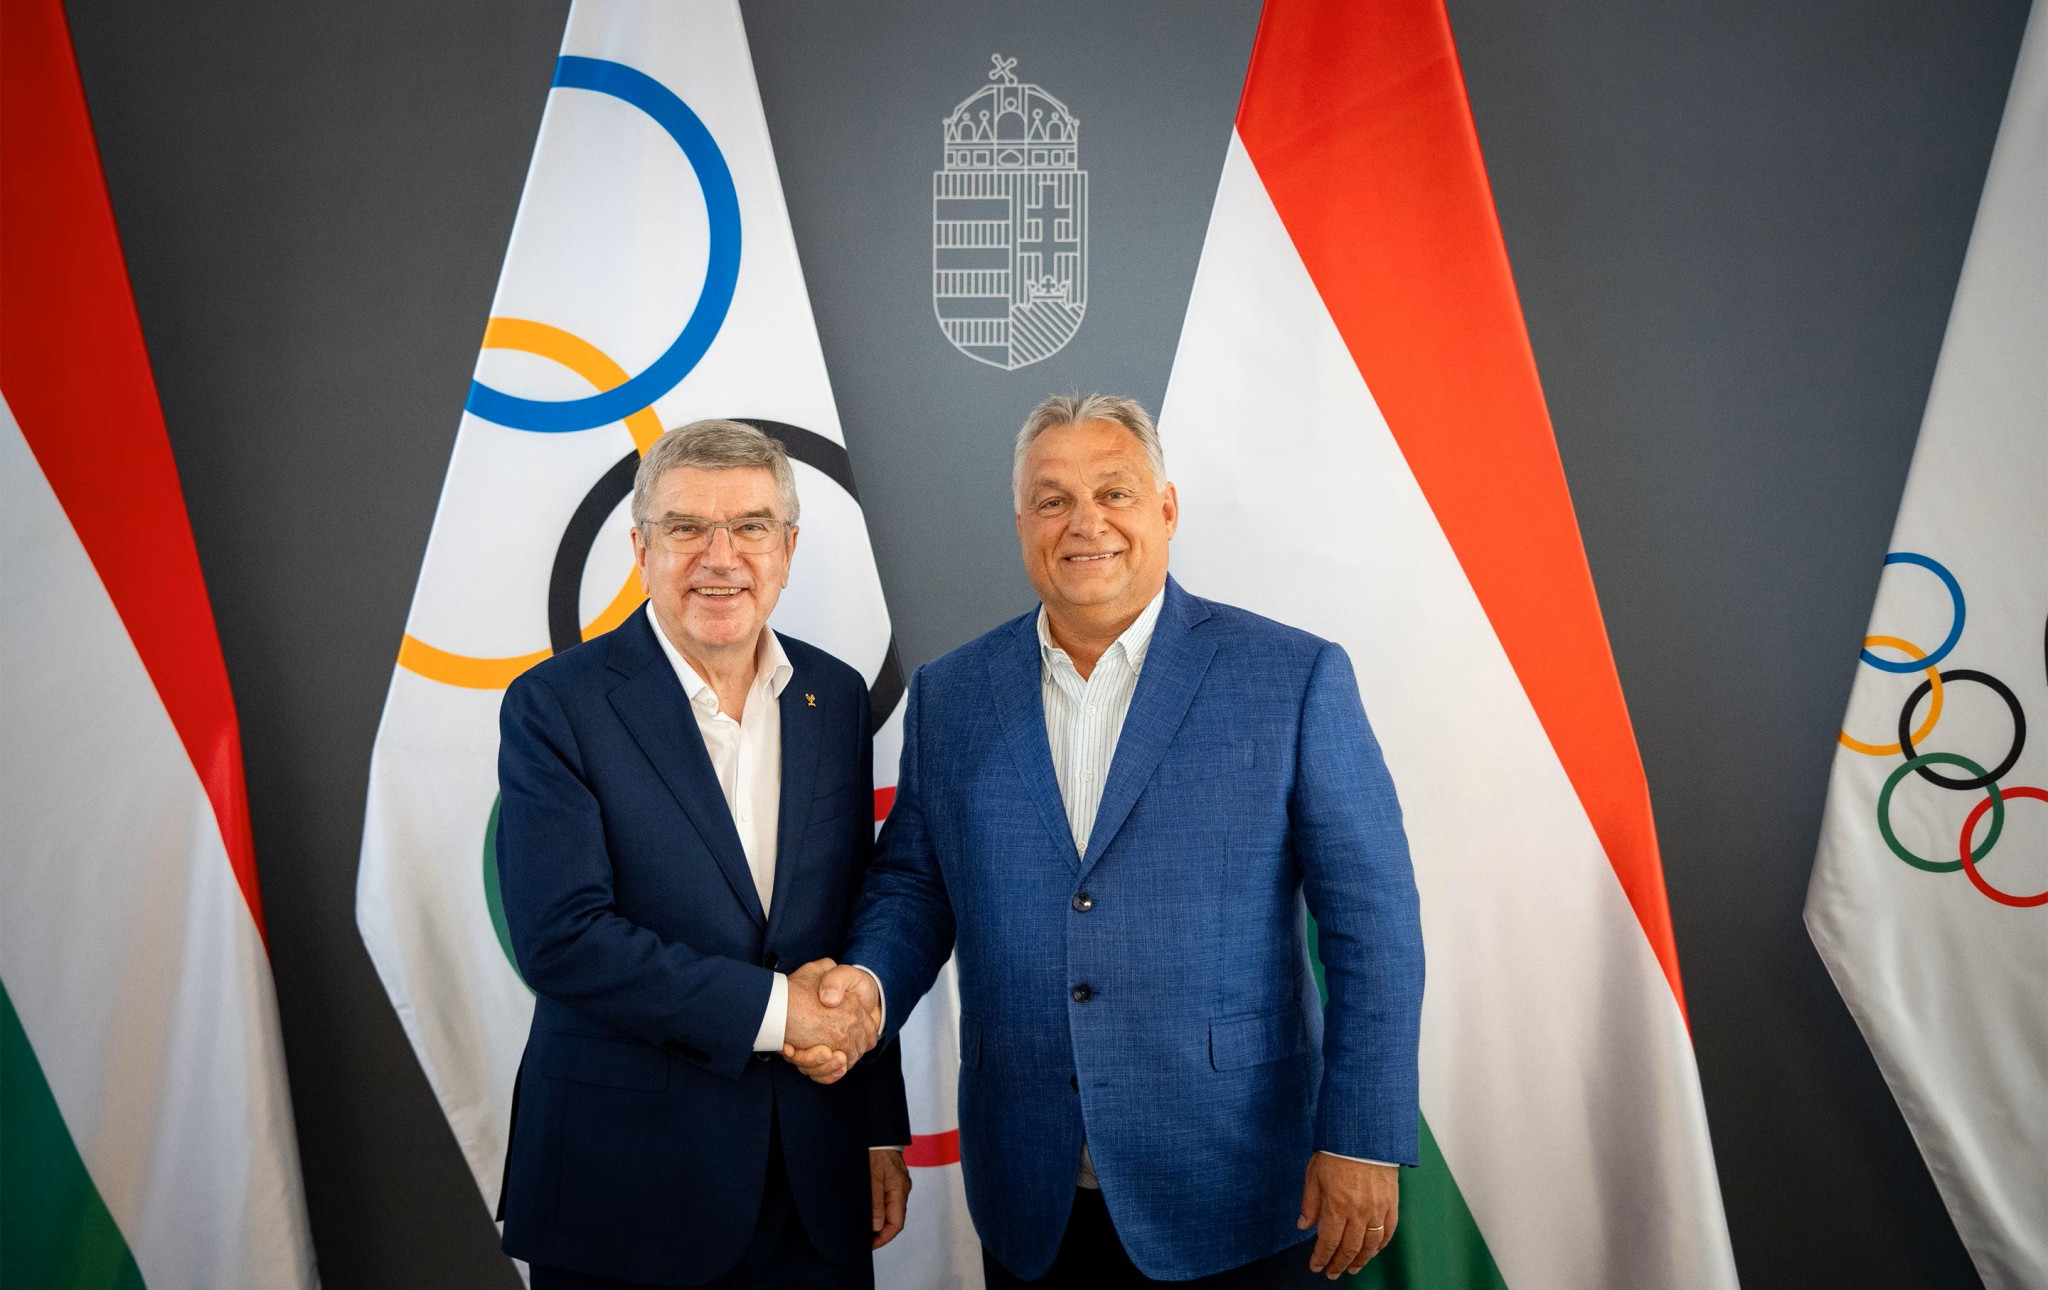 IOC President Thomas Bach, left, held a three-hour meeting with authoritarian Hungarian Prime Minister Viktor Orbán, right, during the World Athletics Championships ©IOC